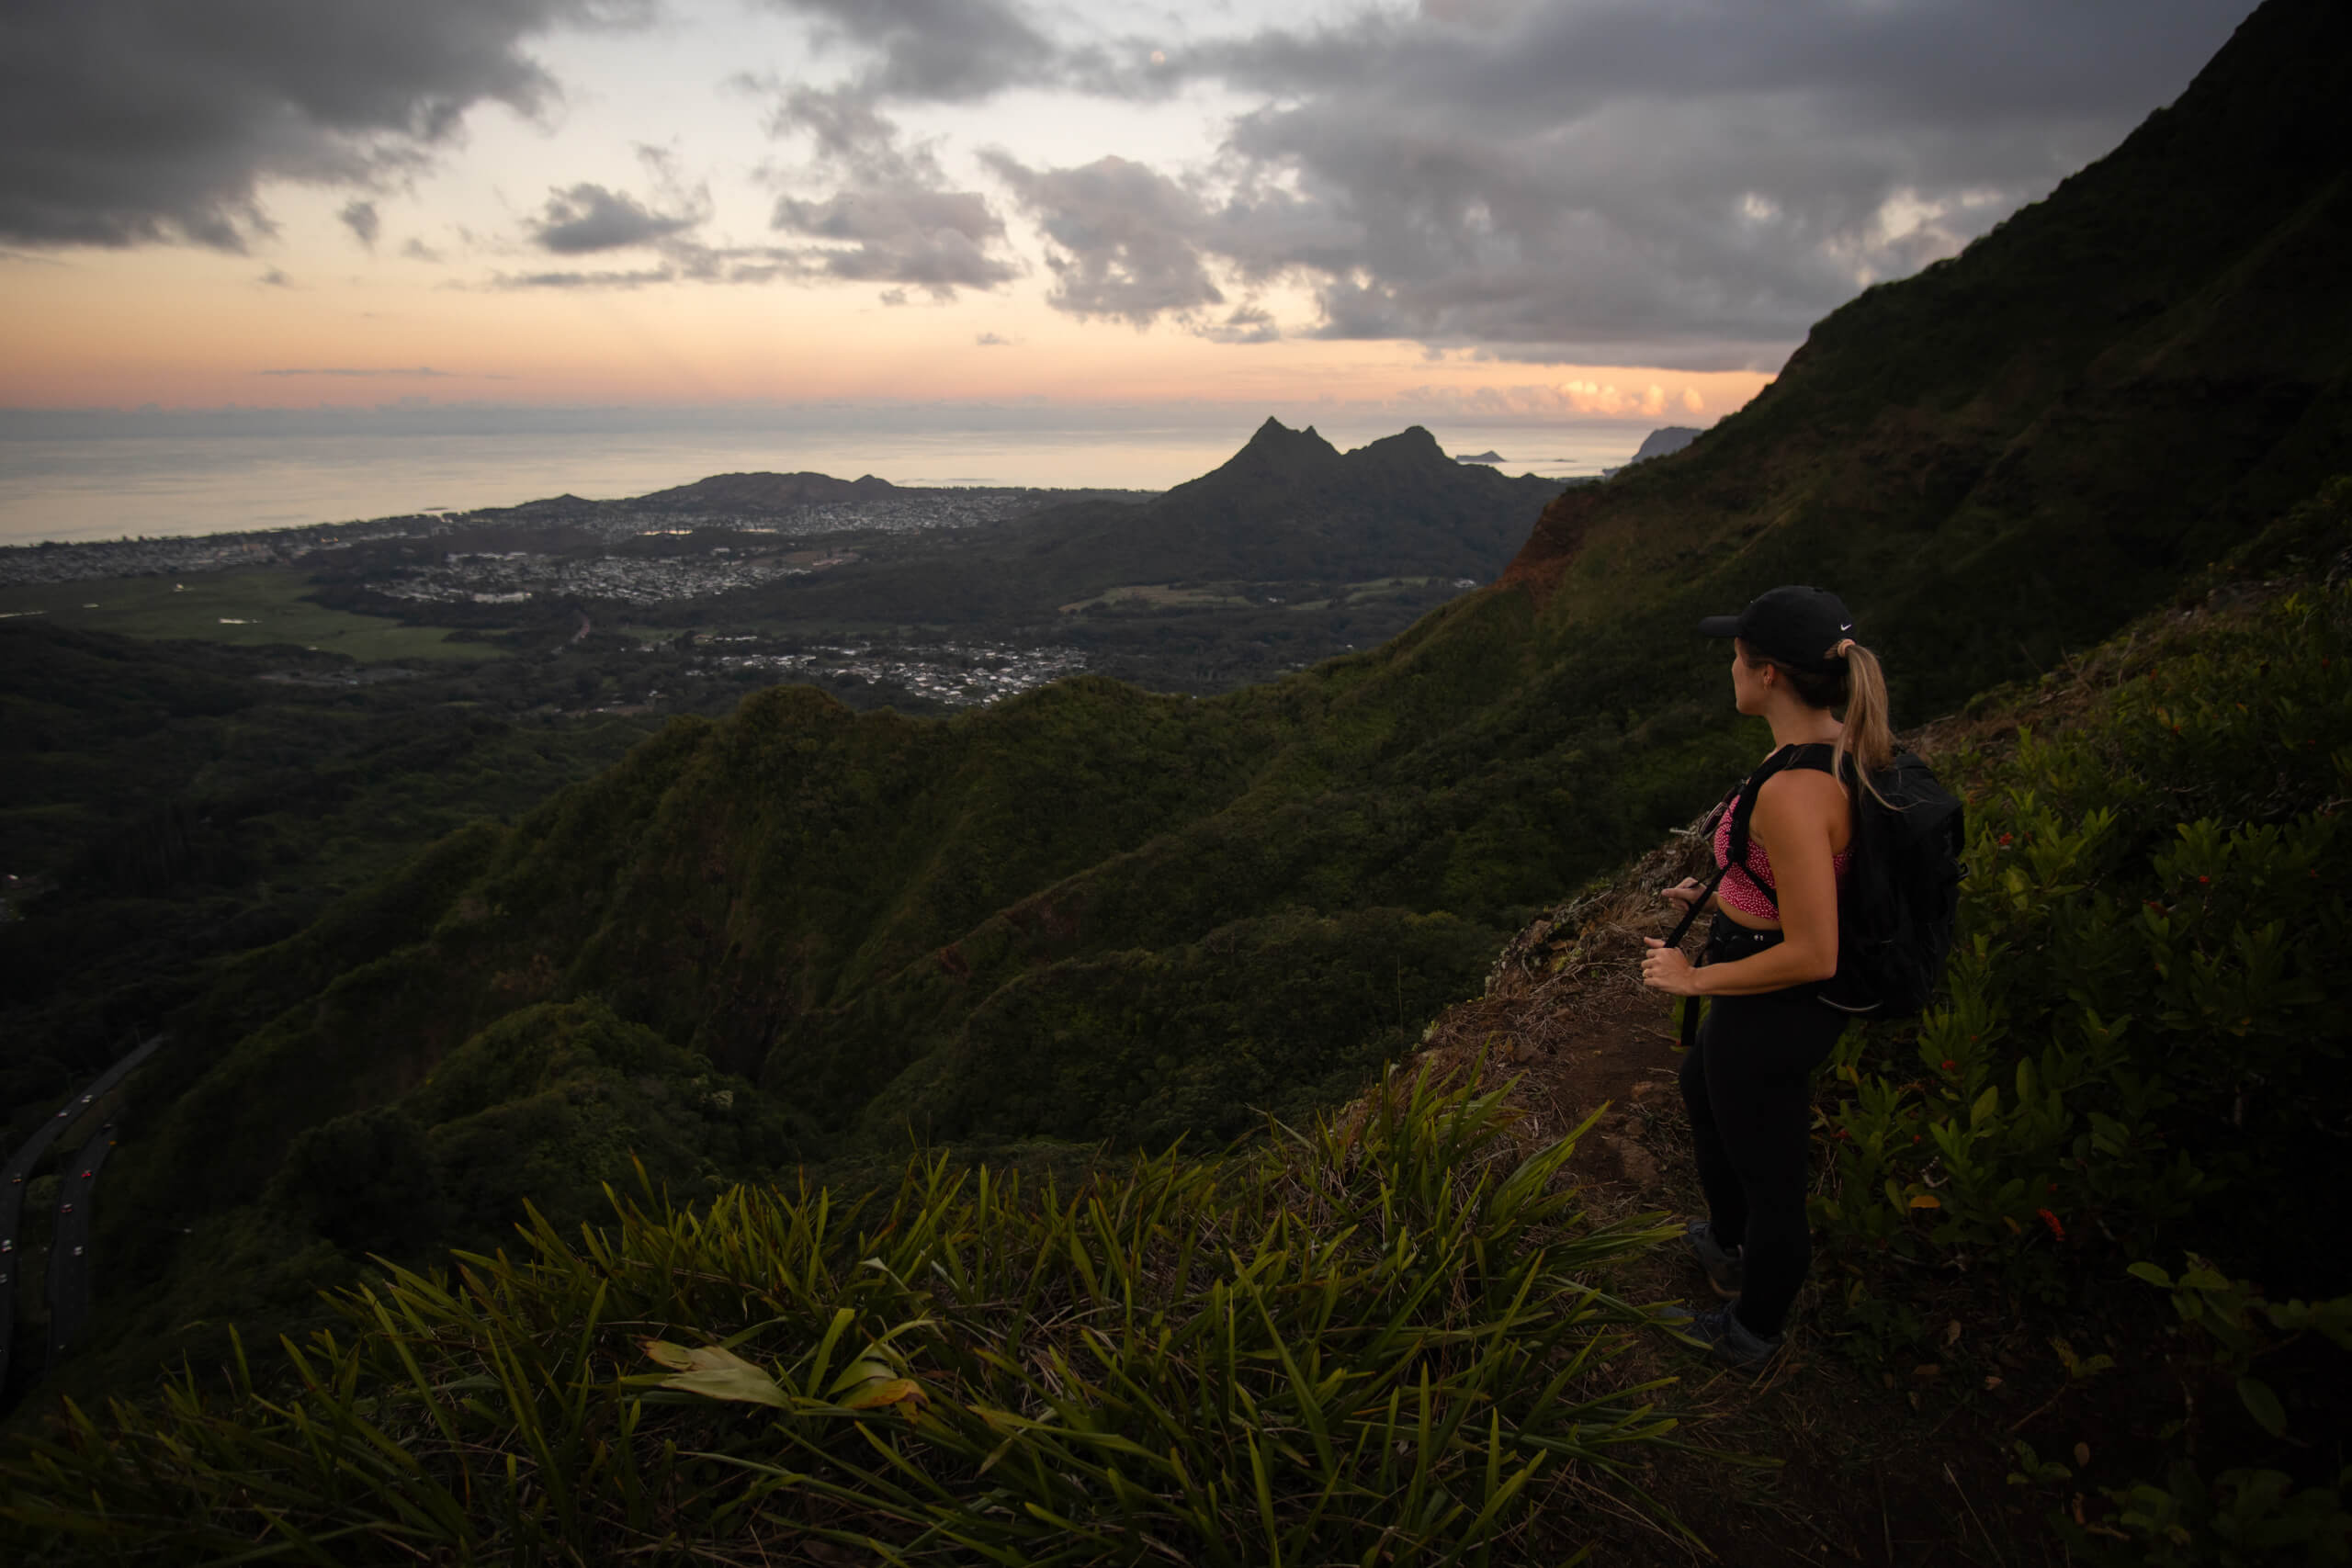 Looking out over Kailua